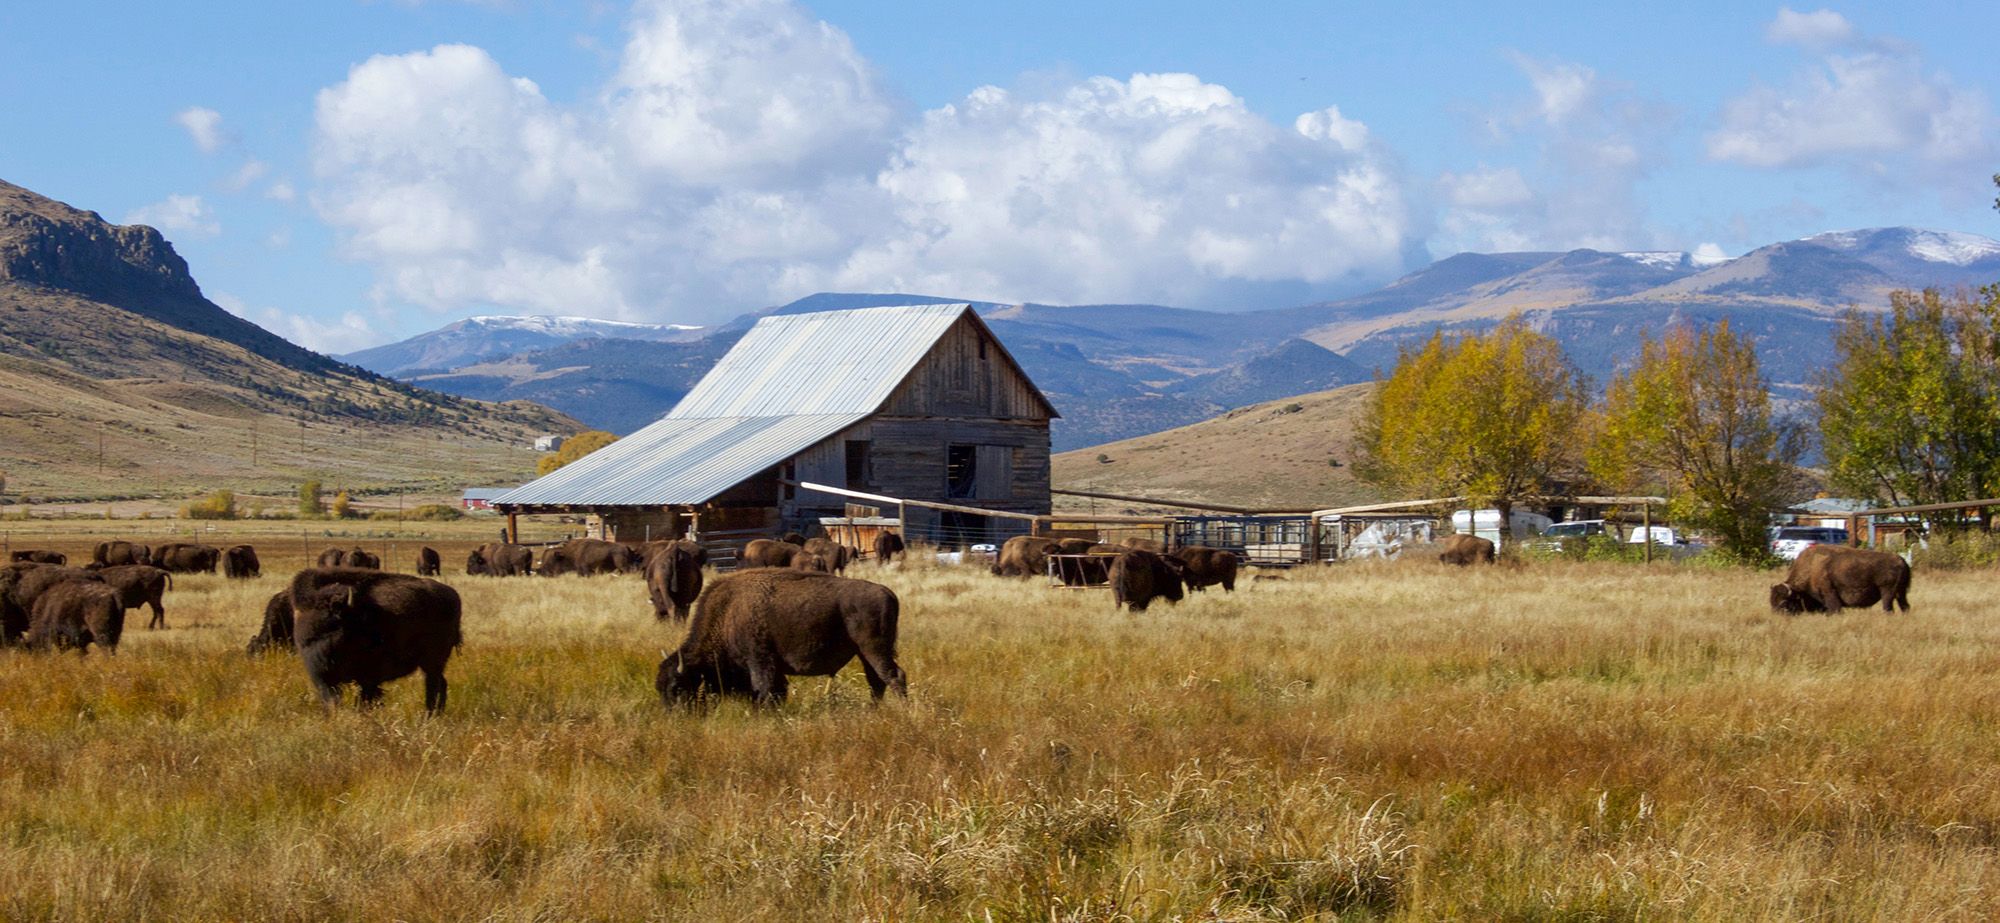 colorado bison on farm land with barn